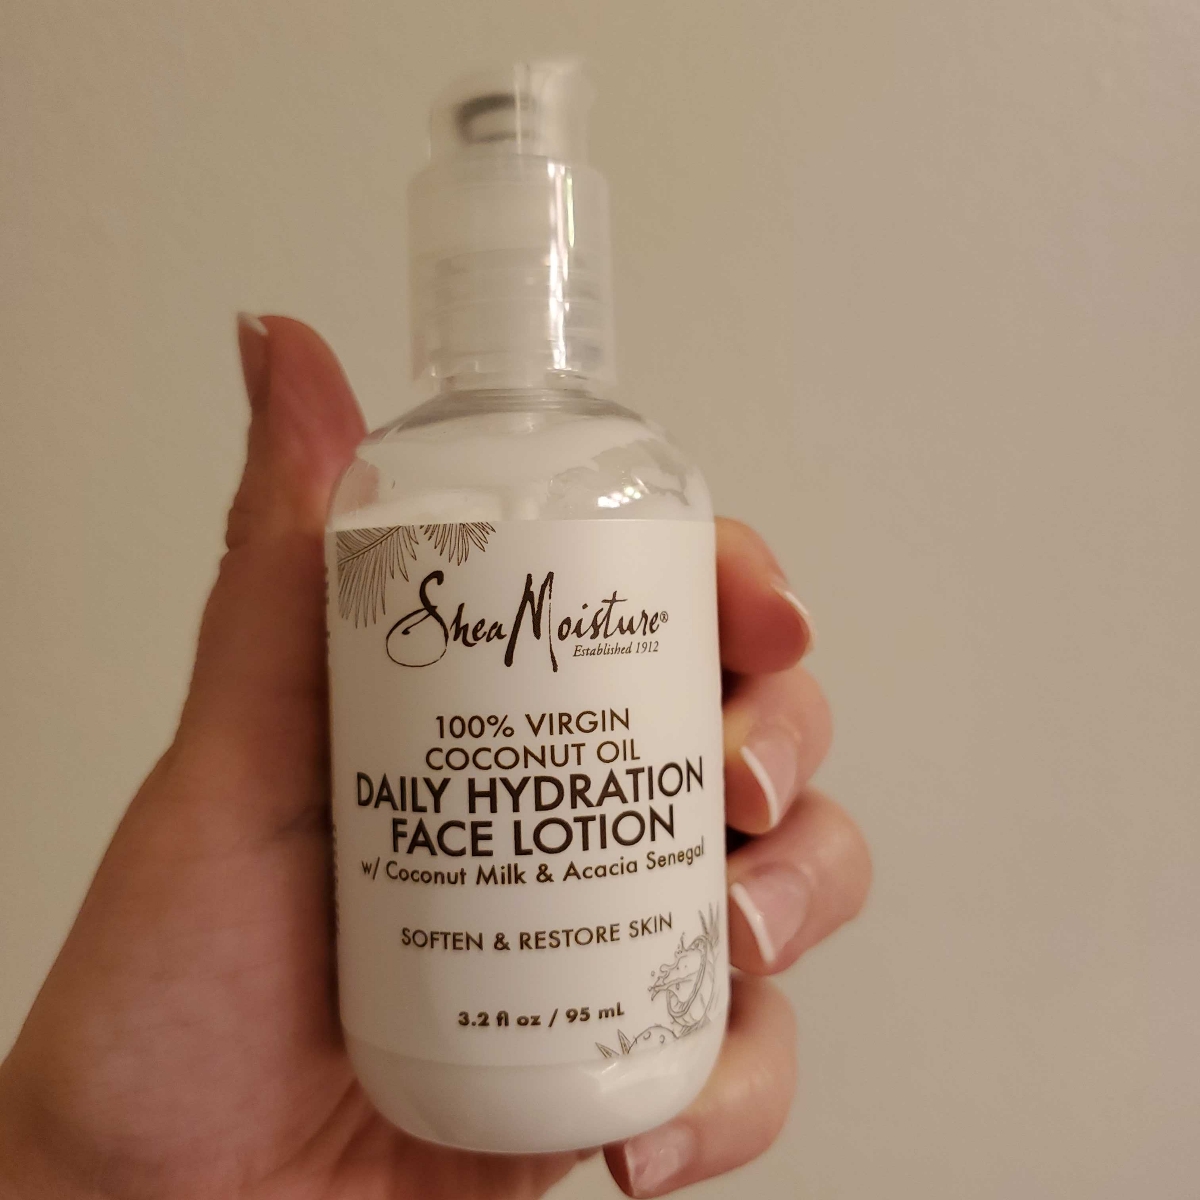 SheaMoisture 100% Virgin Coconut Oil Daily Hydration Face Lotion Review |  abillion